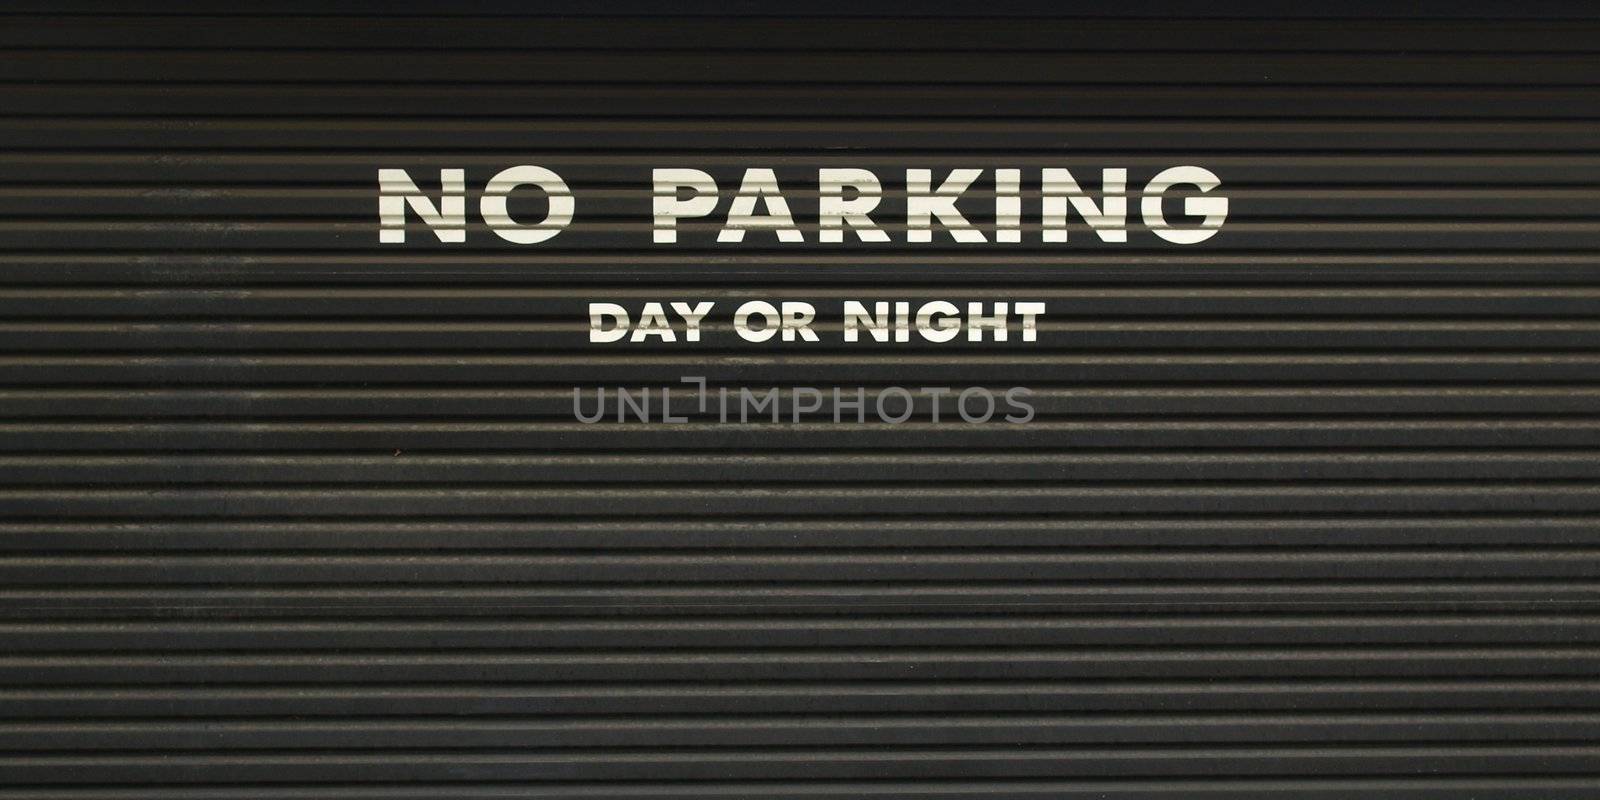 No parking sign by claudiodivizia